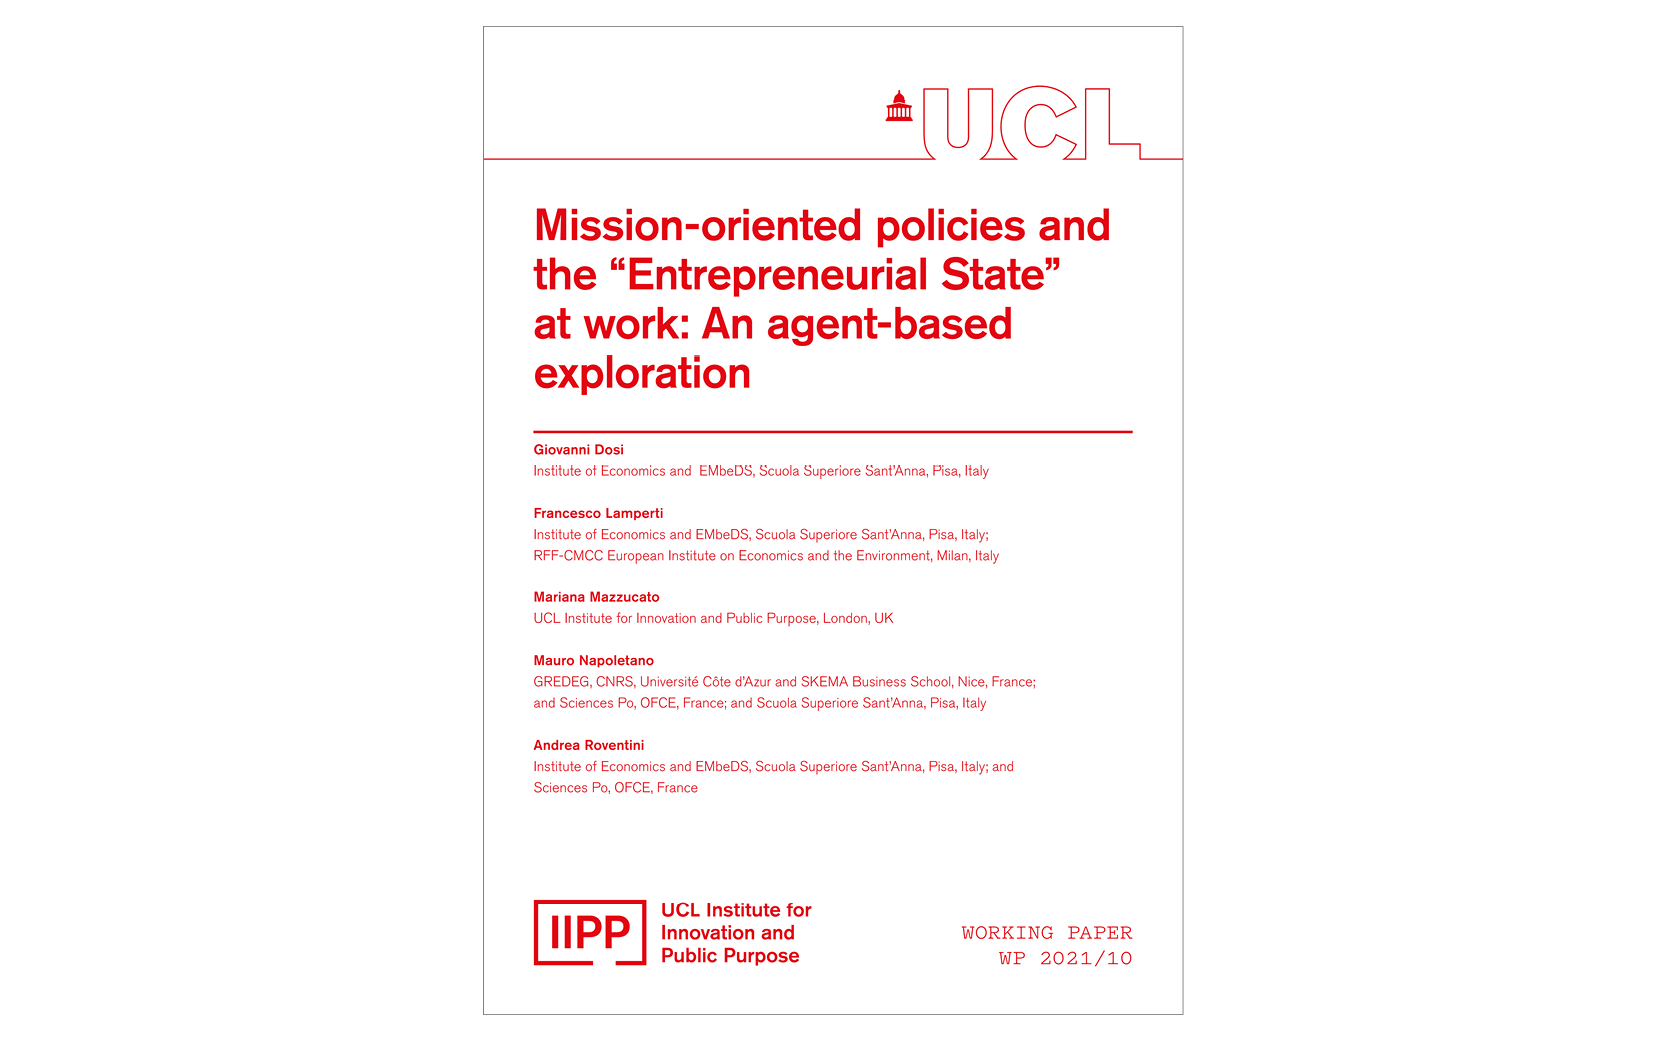 final_iipp_2021-10_mission-oriented_polices_and_the_entrepreneurial_state_at_work.png